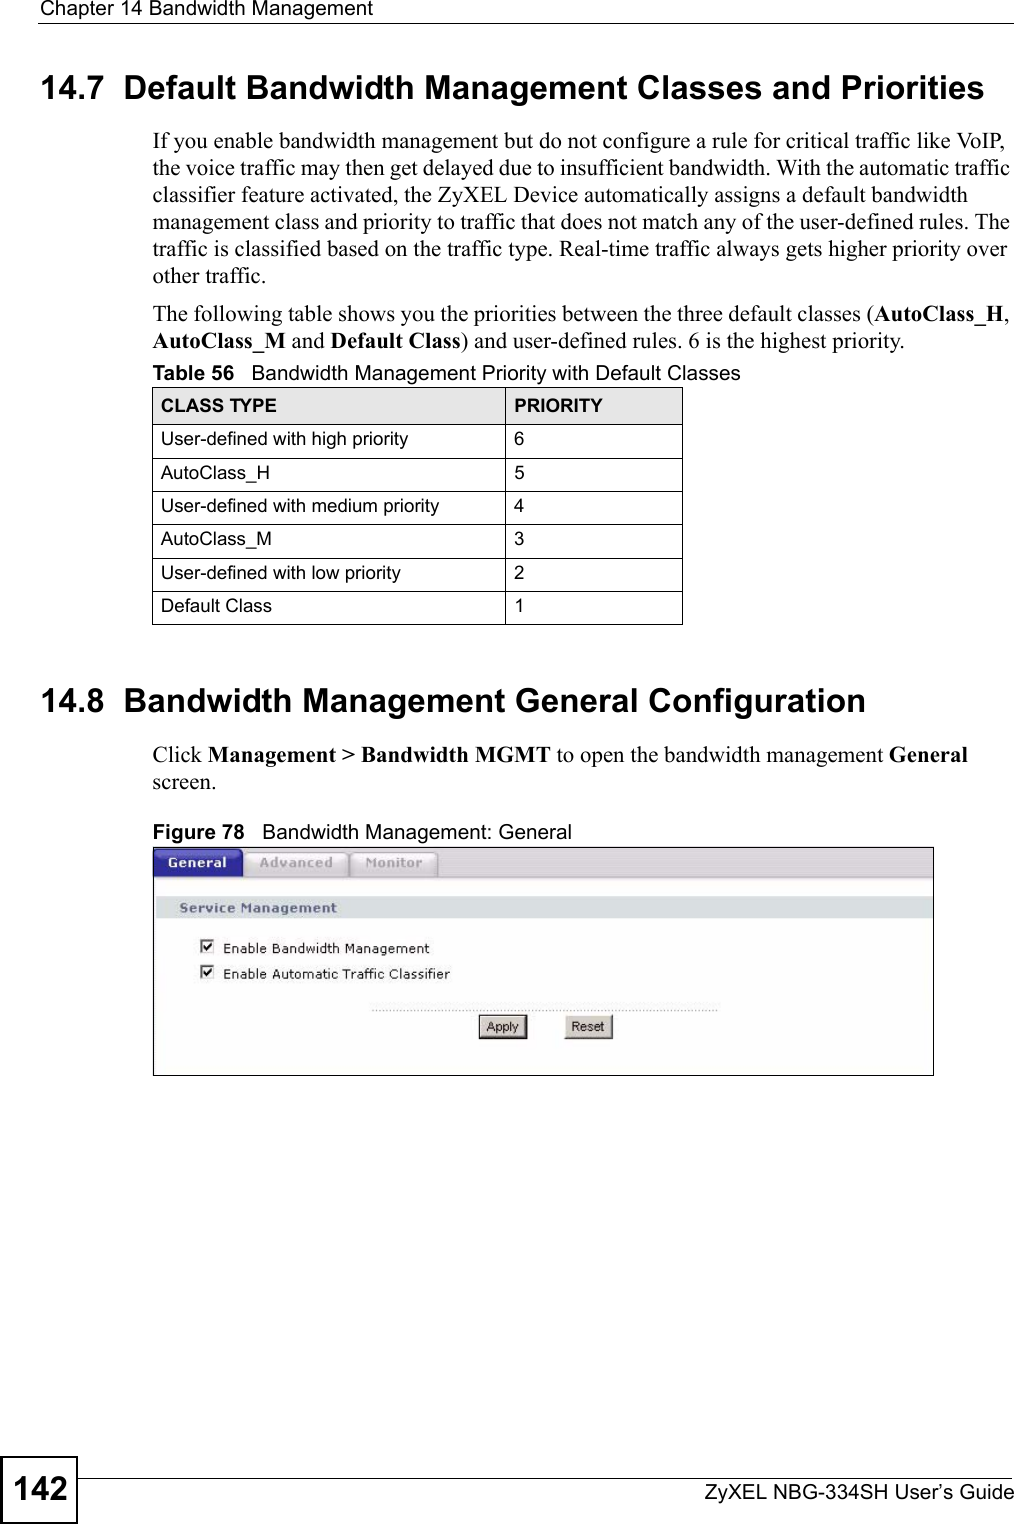 Chapter 14 Bandwidth ManagementZyXEL NBG-334SH User’s Guide14214.7  Default Bandwidth Management Classes and PrioritiesIf you enable bandwidth management but do not configure a rule for critical traffic like VoIP, the voice traffic may then get delayed due to insufficient bandwidth. With the automatic traffic classifier feature activated, the ZyXEL Device automatically assigns a default bandwidth management class and priority to traffic that does not match any of the user-defined rules. The traffic is classified based on the traffic type. Real-time traffic always gets higher priority over other traffic. The following table shows you the priorities between the three default classes (AutoClass_H, AutoClass_M and Default Class) and user-defined rules. 6 is the highest priority.14.8  Bandwidth Management General Configuration Click Management &gt; Bandwidth MGMT to open the bandwidth management General screen.Figure 78   Bandwidth Management: GeneralTable 56   Bandwidth Management Priority with Default ClassesCLASS TYPE PRIORITYUser-defined with high priority 6AutoClass_H 5User-defined with medium priority 4AutoClass_M 3User-defined with low priority 2Default Class 1